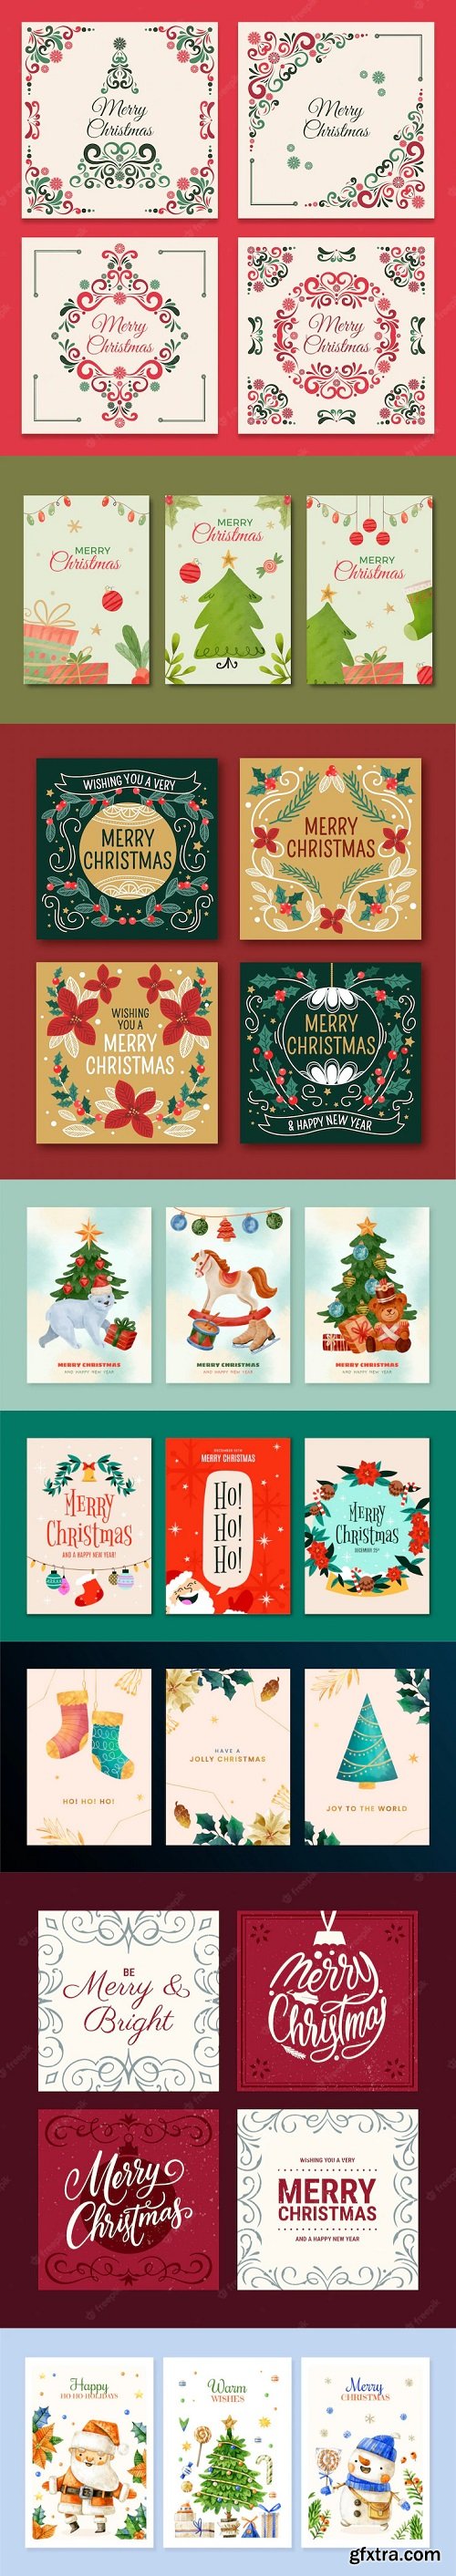 Ornamental christmas cards collection